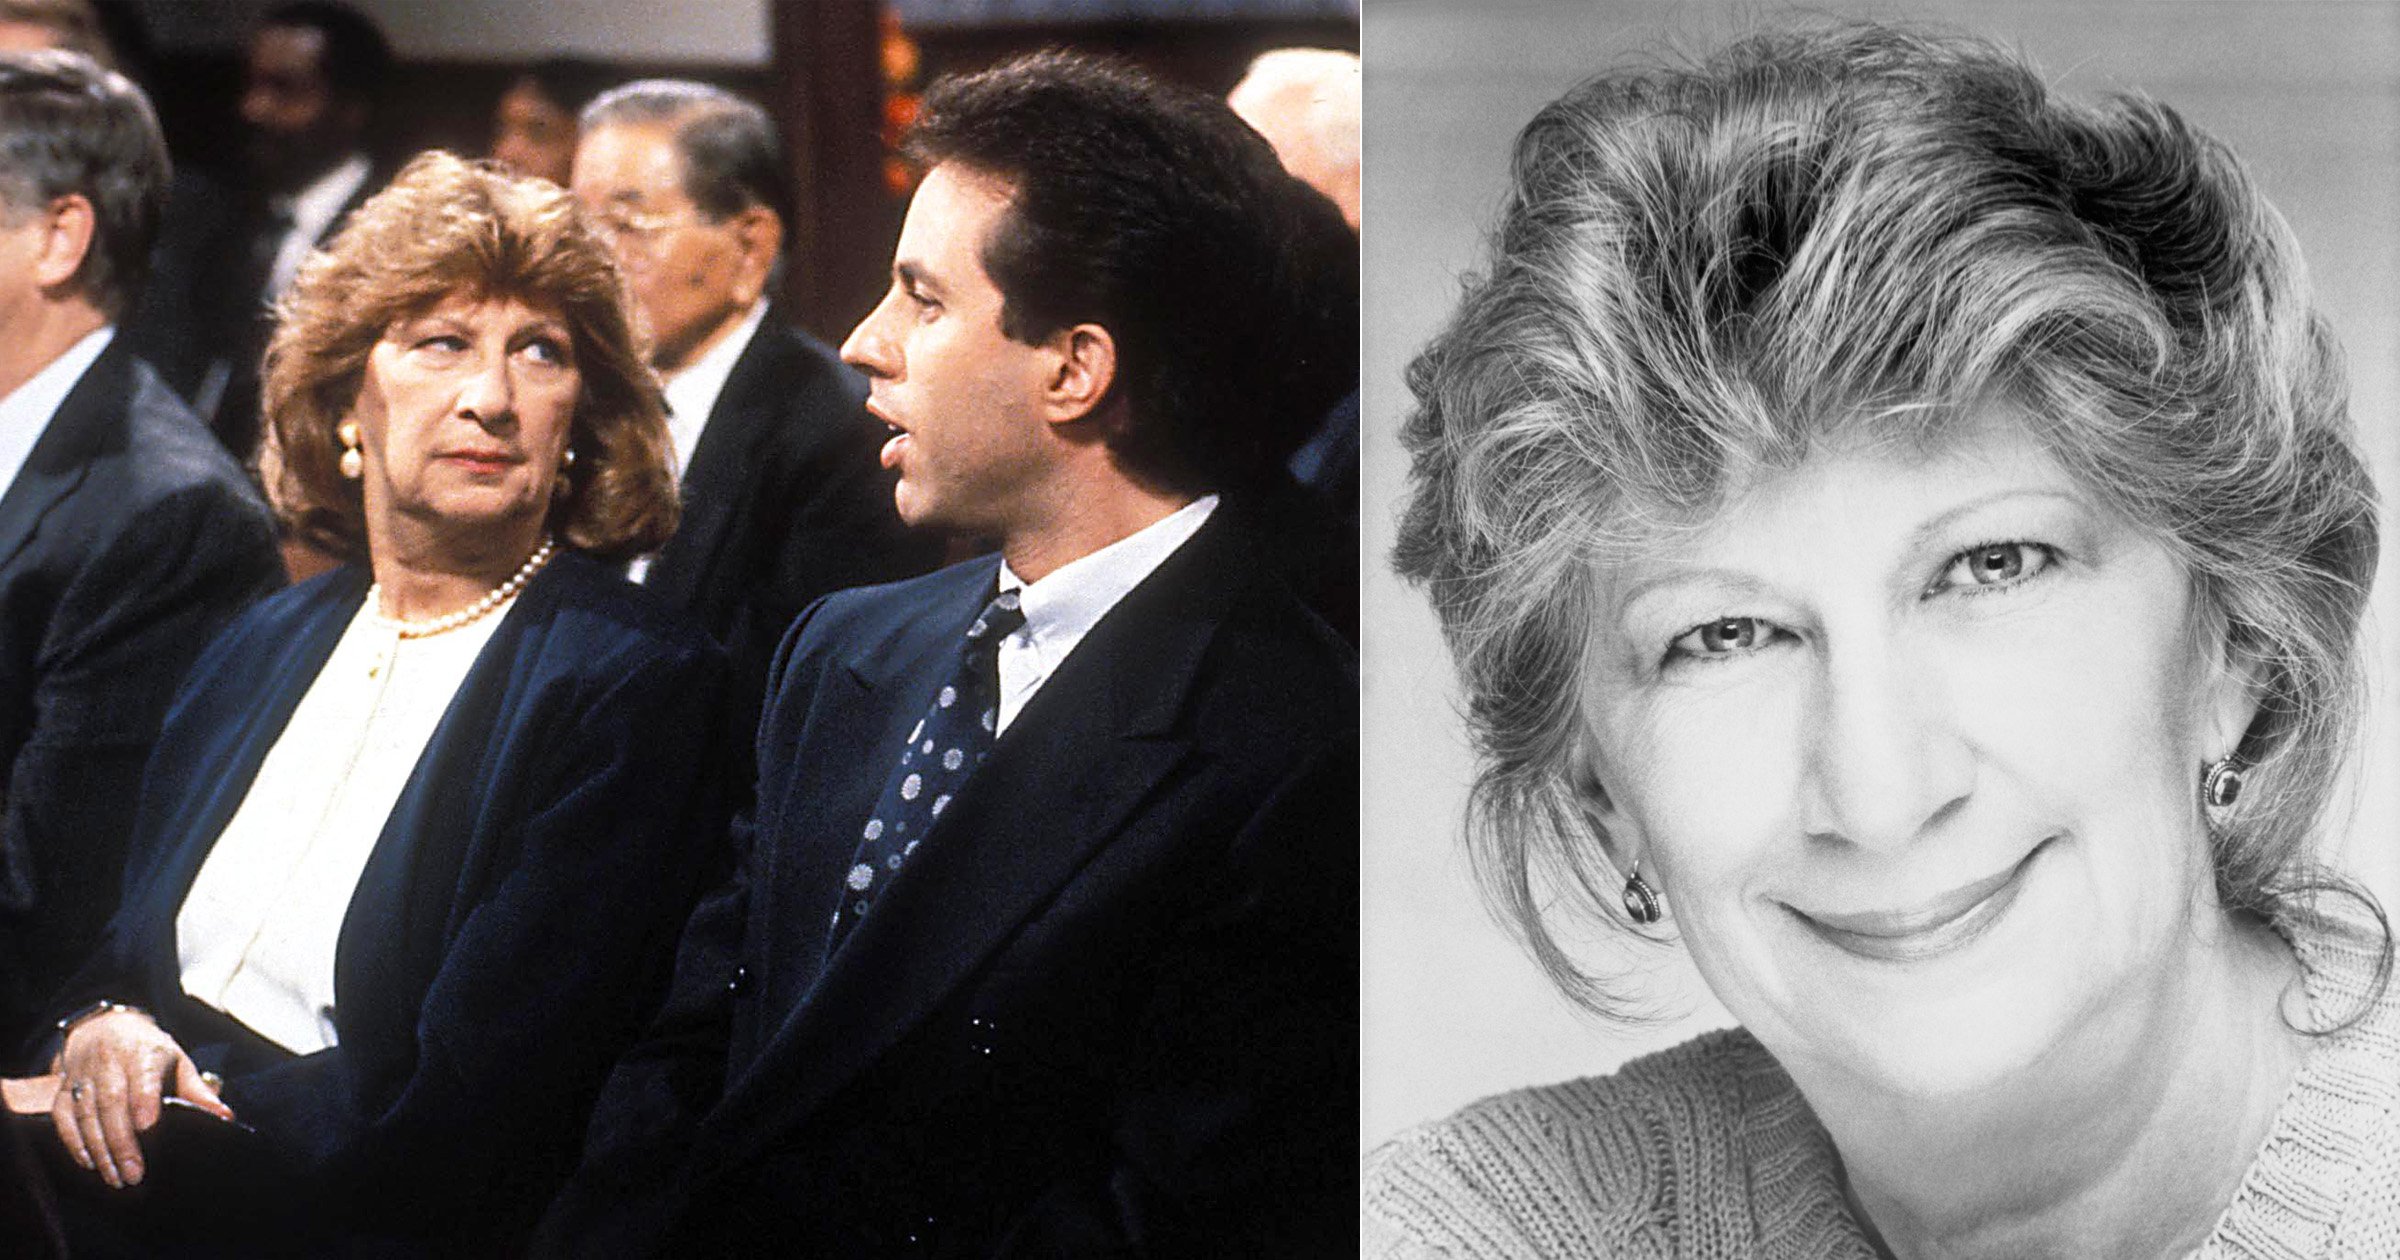 Jerry Seinfeld pays tribute to on-screen mother Liz Sheridan after death aged 93: ‘So lucky to have known her’